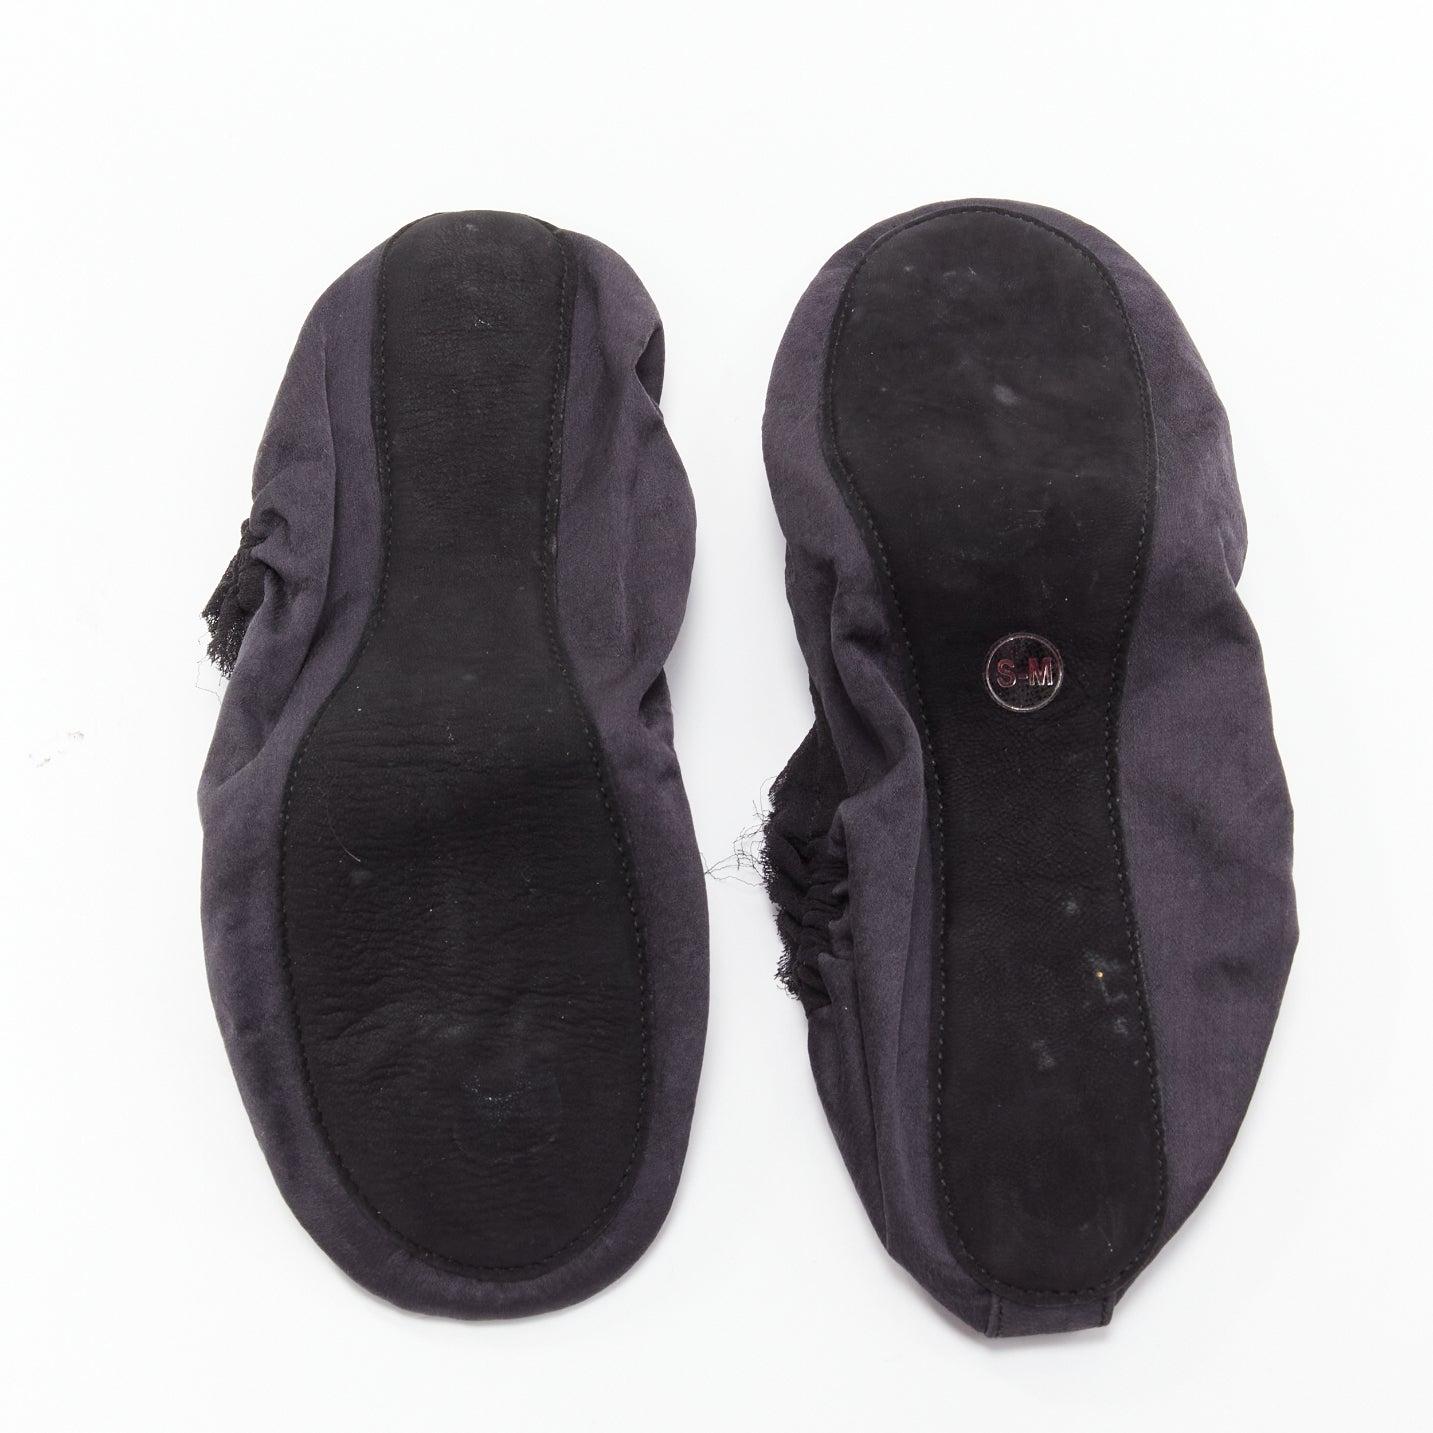 LANVIN black 100% silk satin logo embroidery sleeping flats mask set EU37
Reference: SNKO/A00362
Brand: Lanvin
Material: Silk
Color: Black
Pattern: Solid
Closure: Pull On
Lining: Black Fabric
Extra Details: Lanvin cursive logo on mask and Lanvin